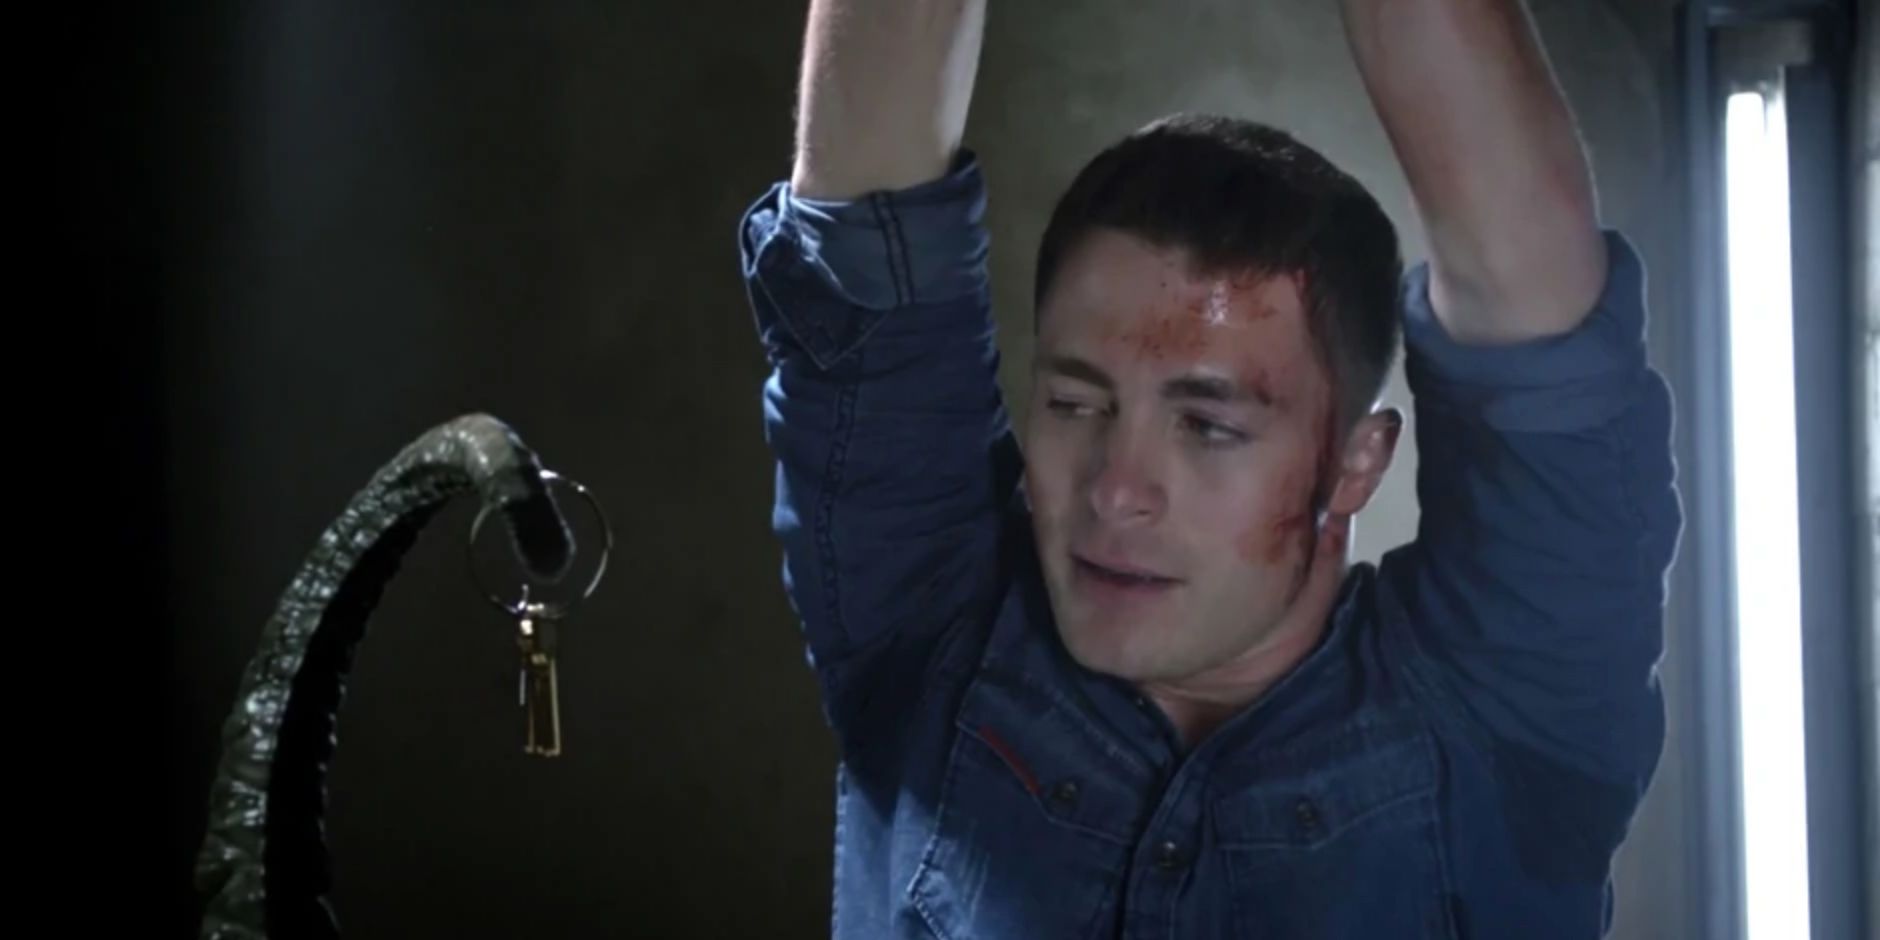 10 Most Unexpected Things To Happen in Teen Wolf